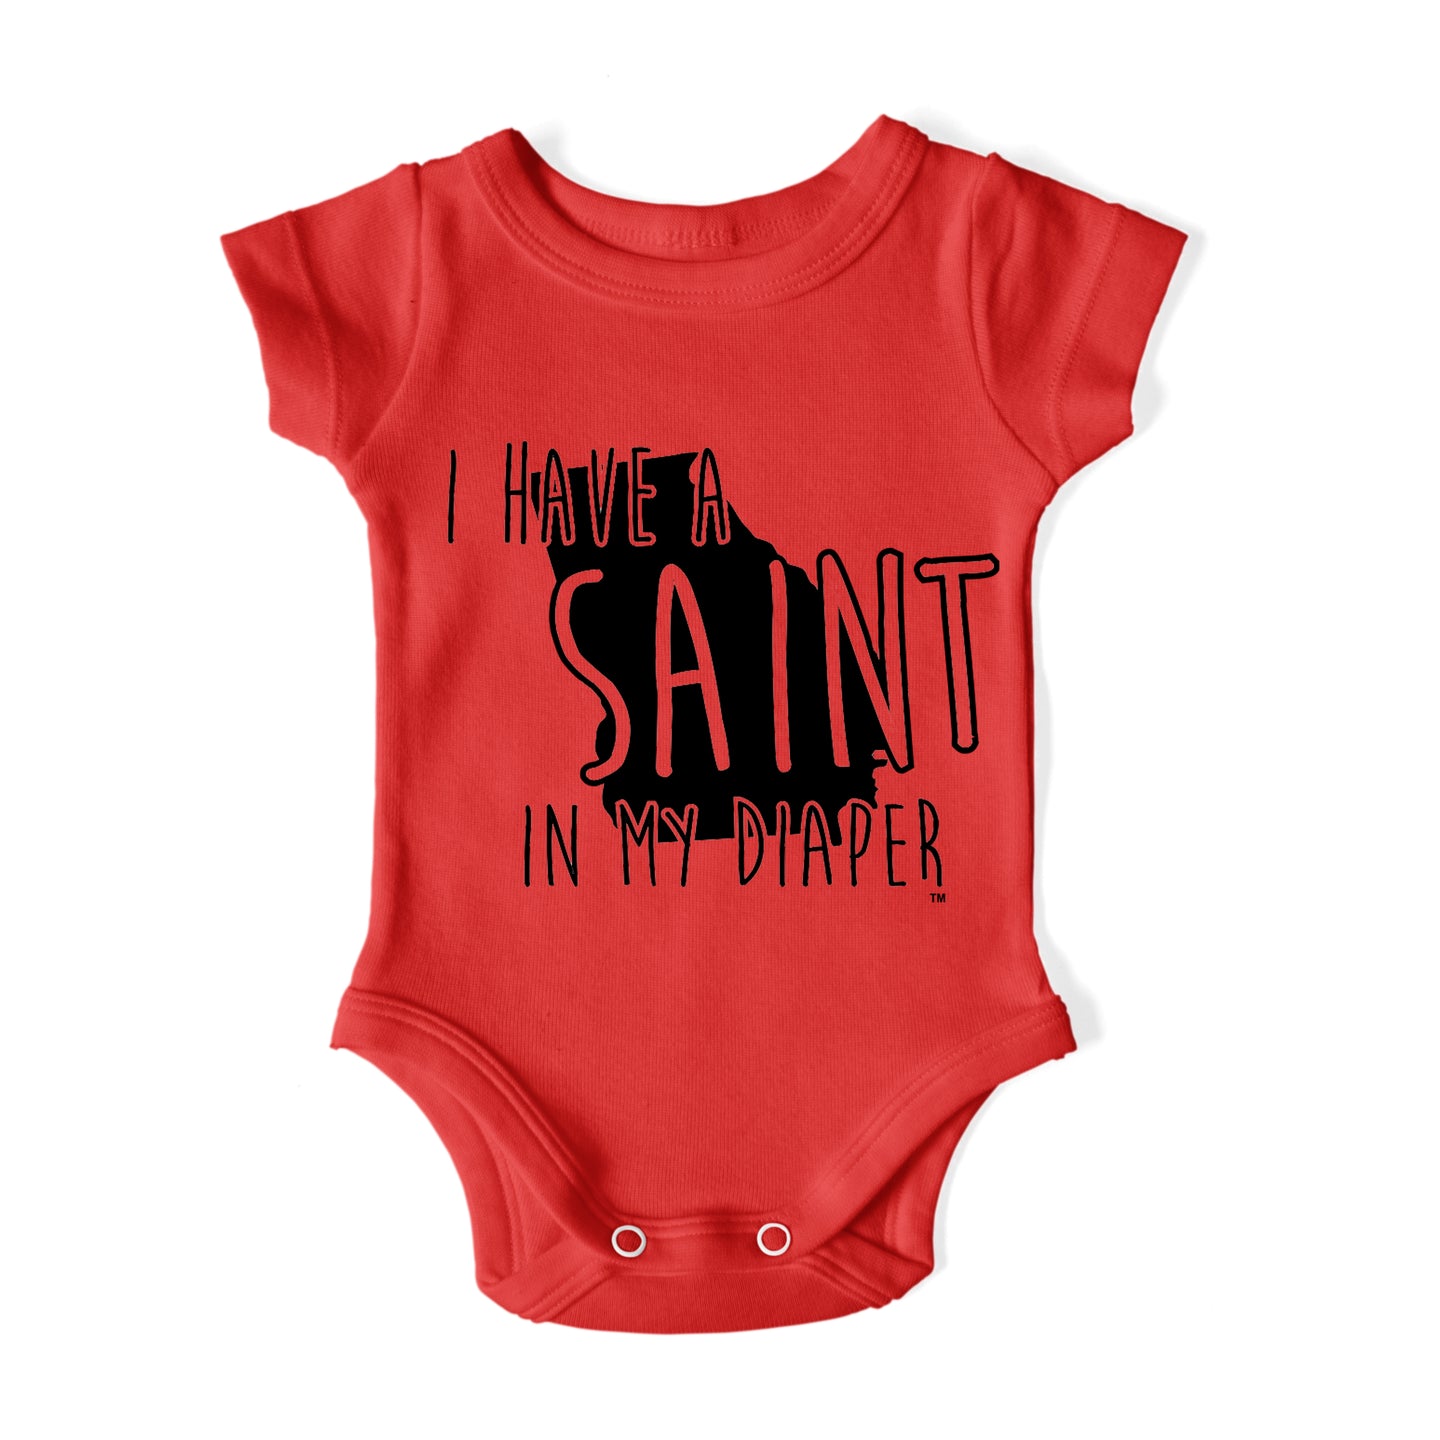 I HAVE A SAINT IN MY DIAPER Baby One Piece